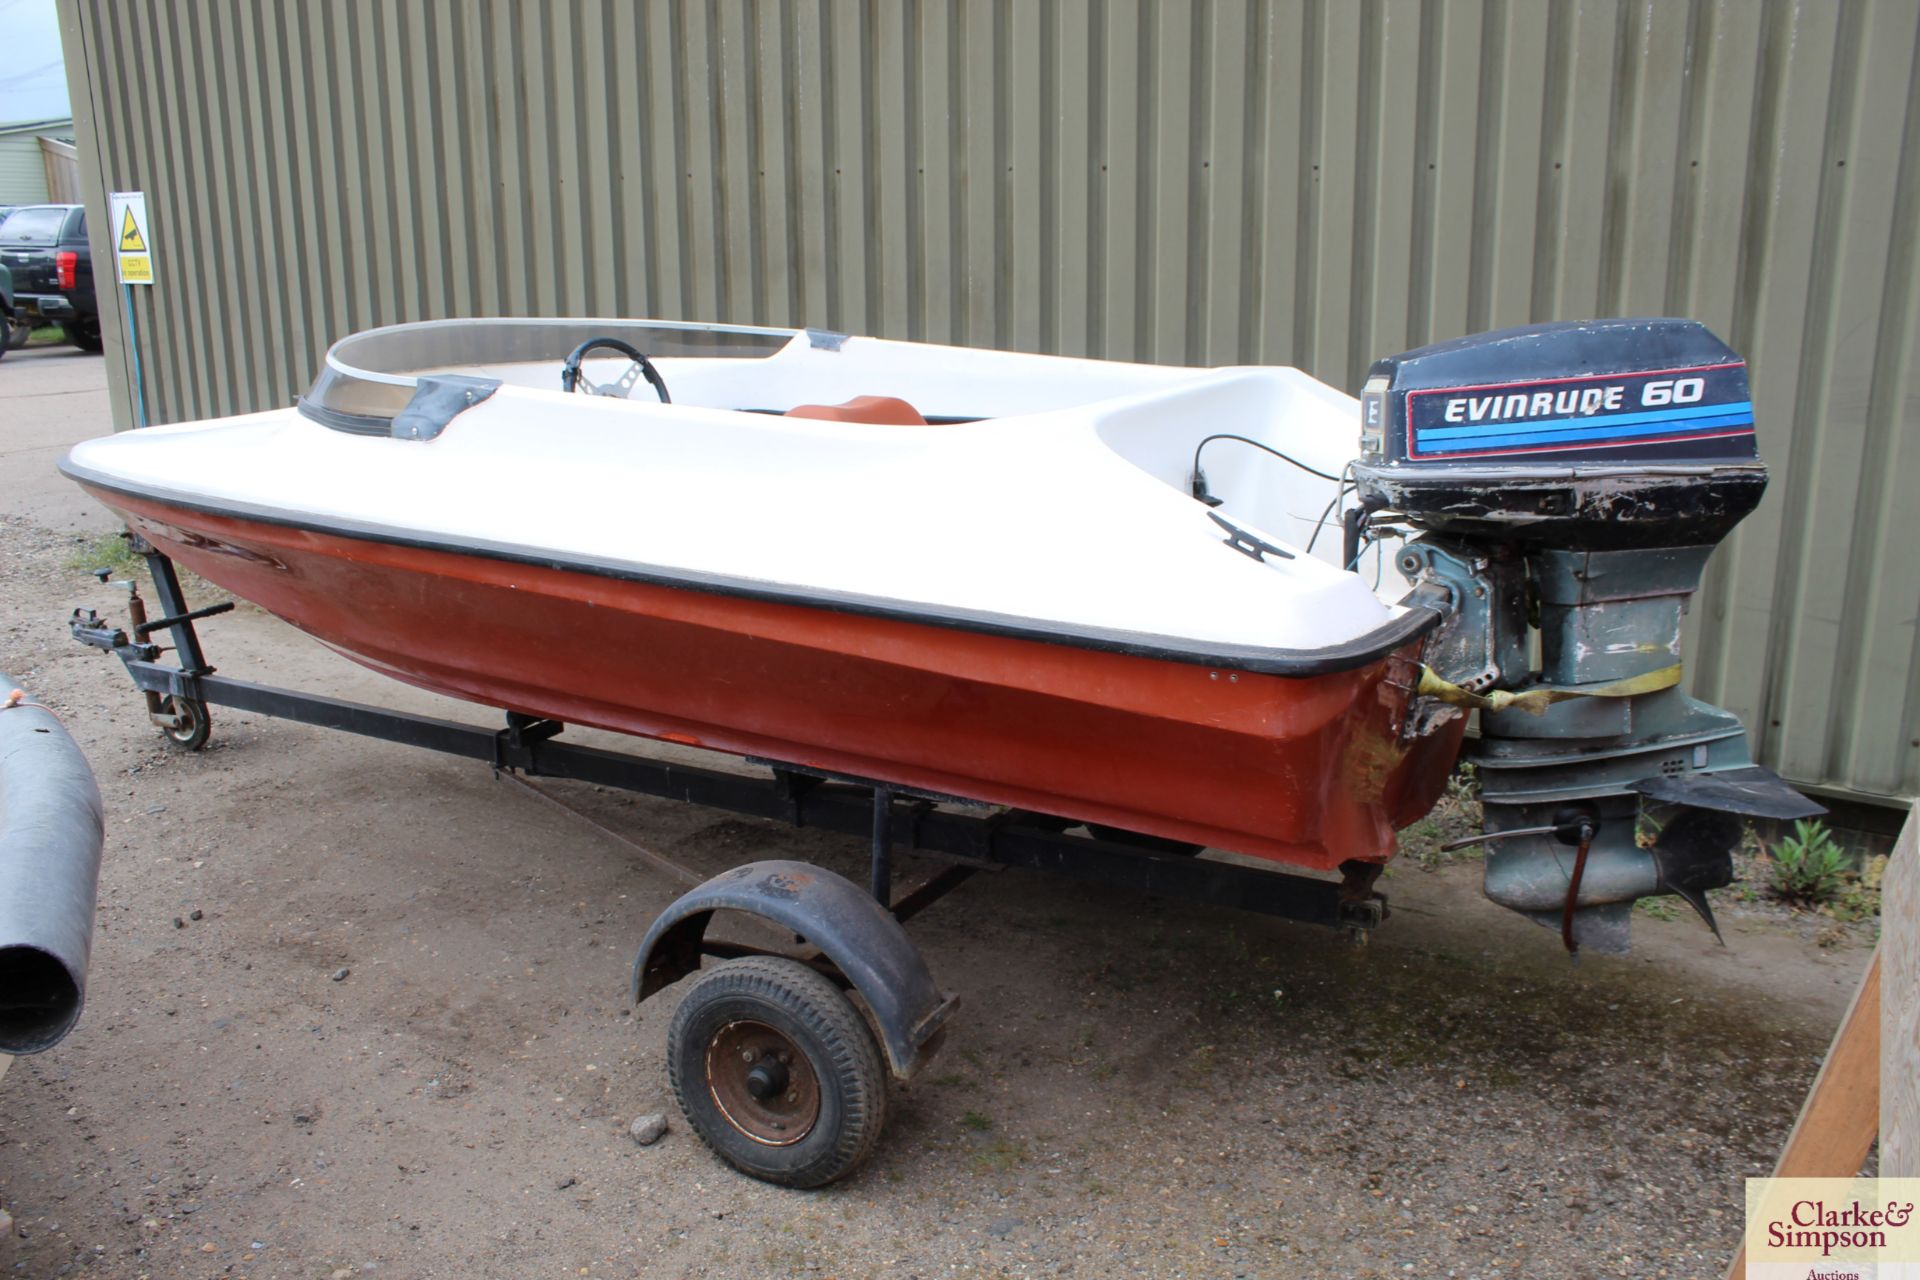 13ft speedboat. With Evinrude 60HP outboard (runs and pumps water), trailer, water skis, knee board, - Image 4 of 17